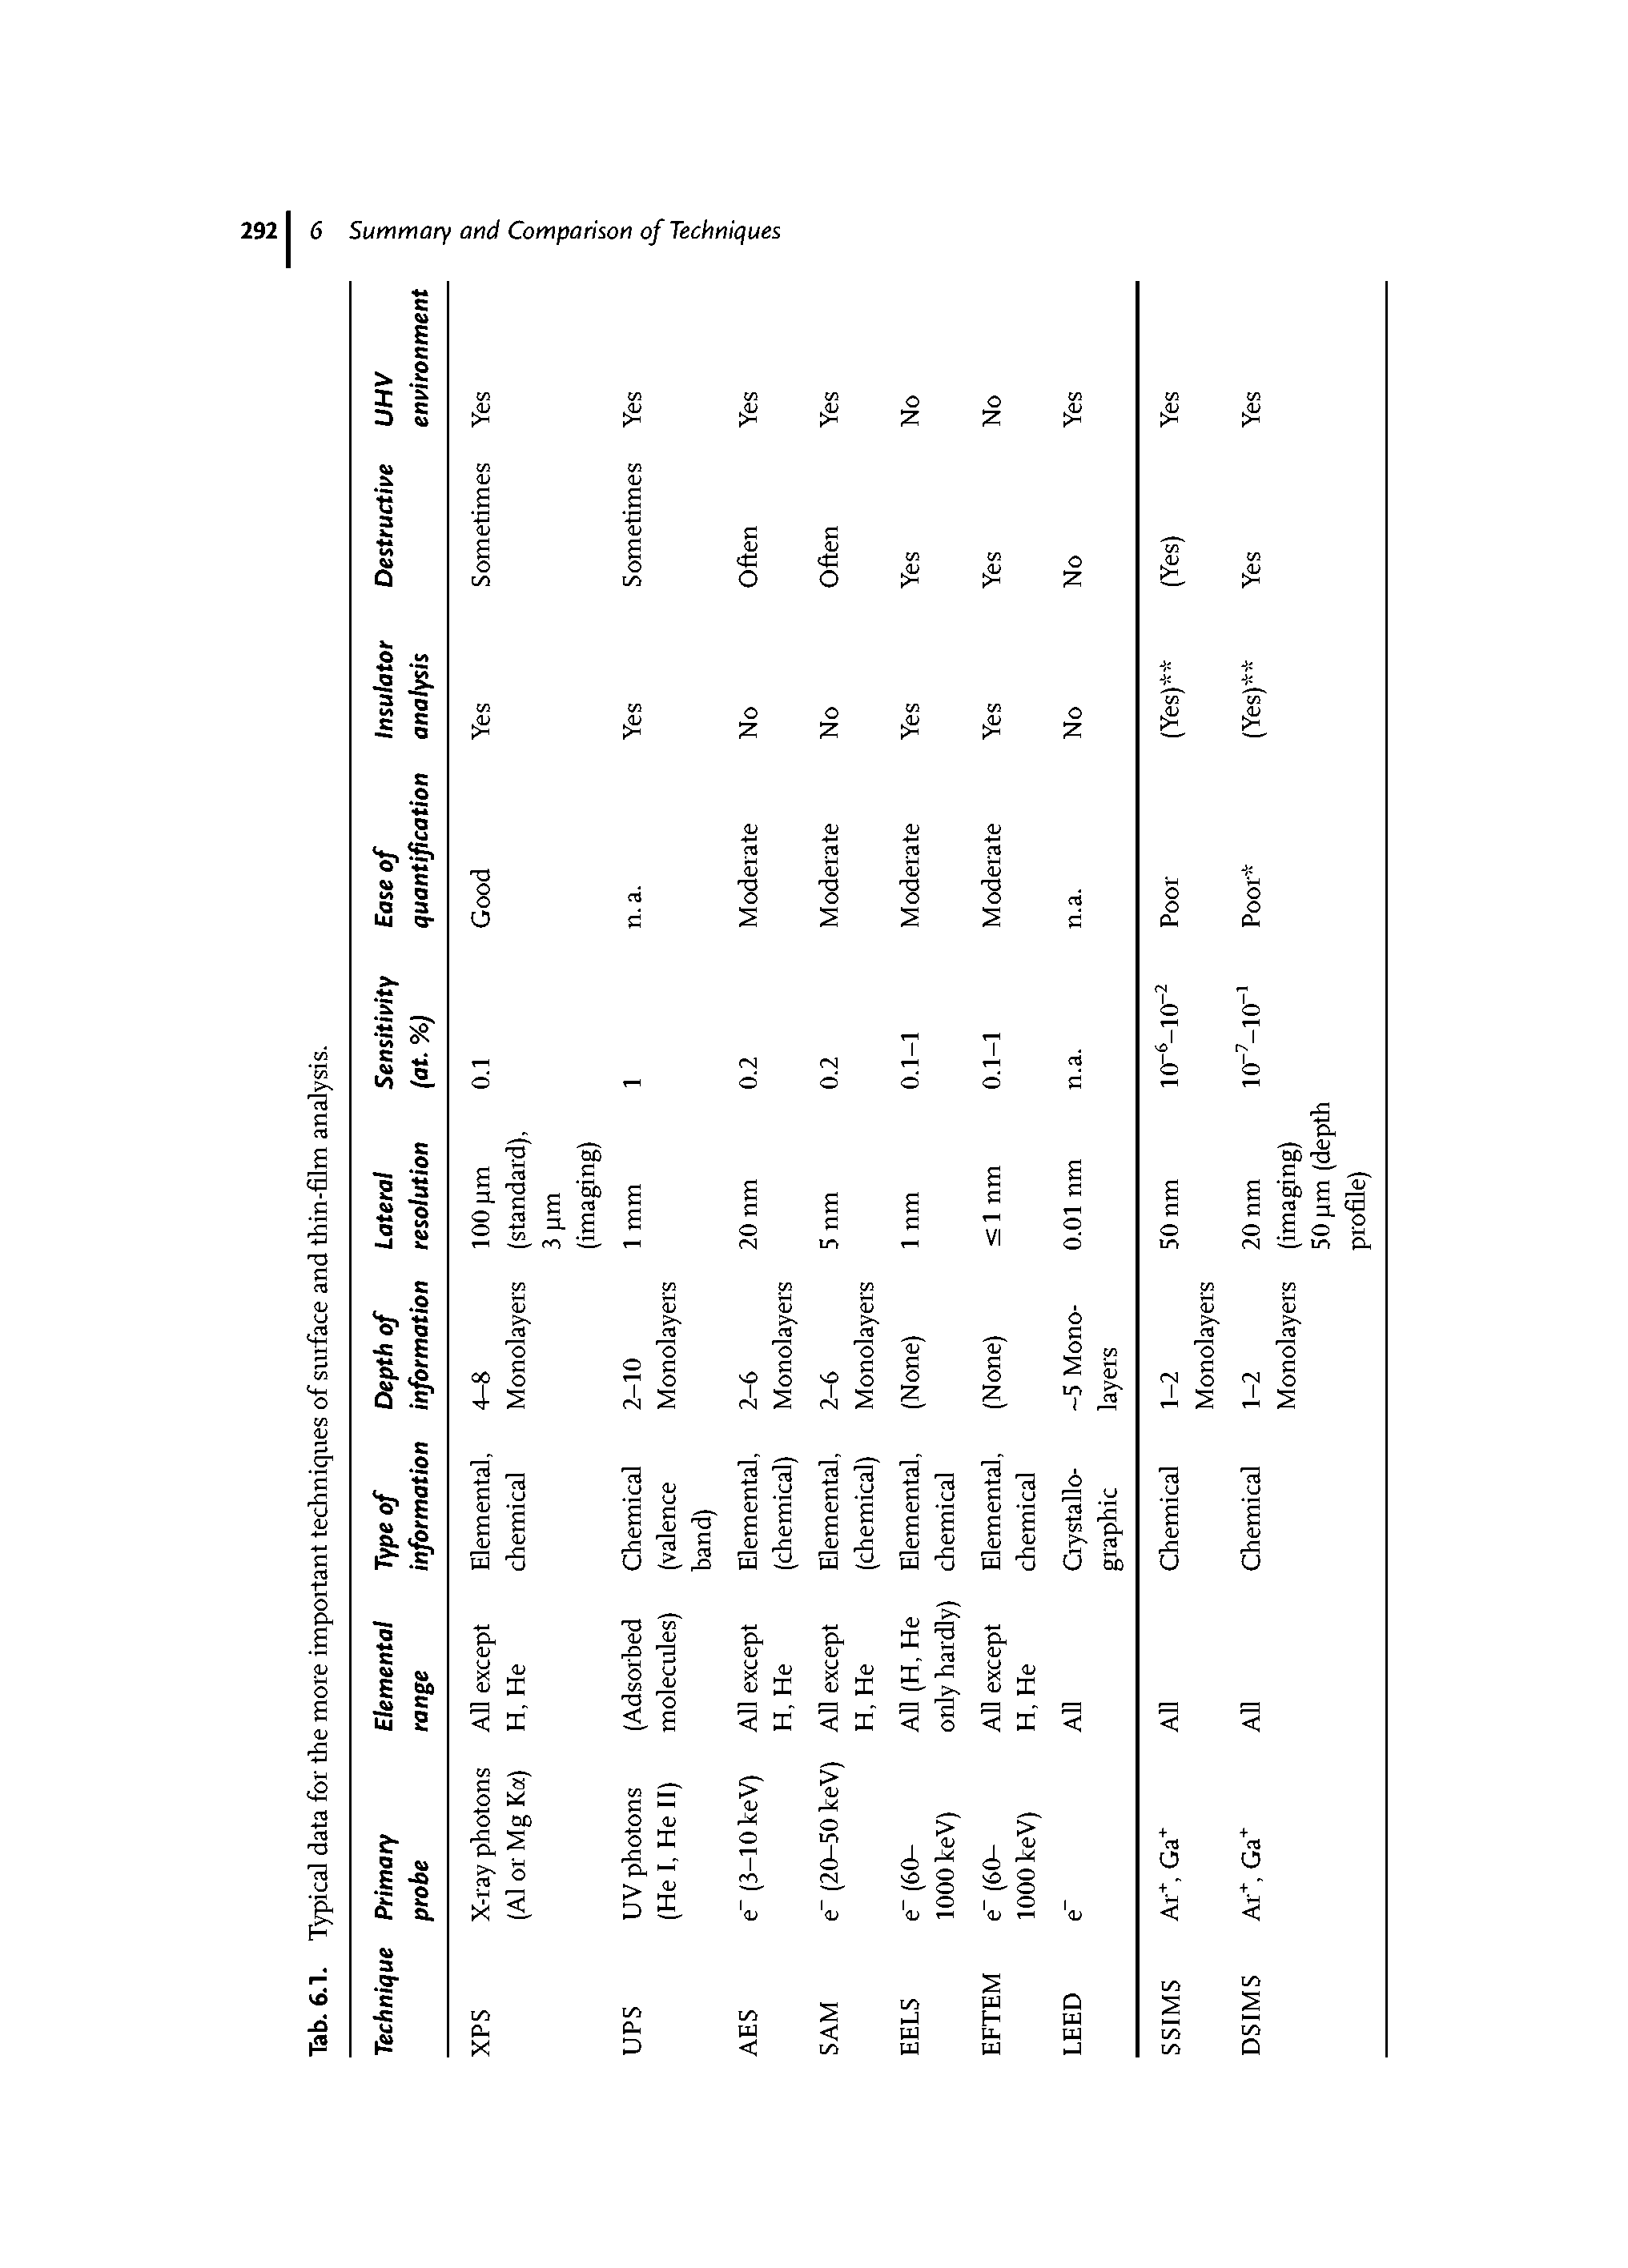 Tab. 6.1. Typical data for the more important techniques of surface and thin-film analysis.